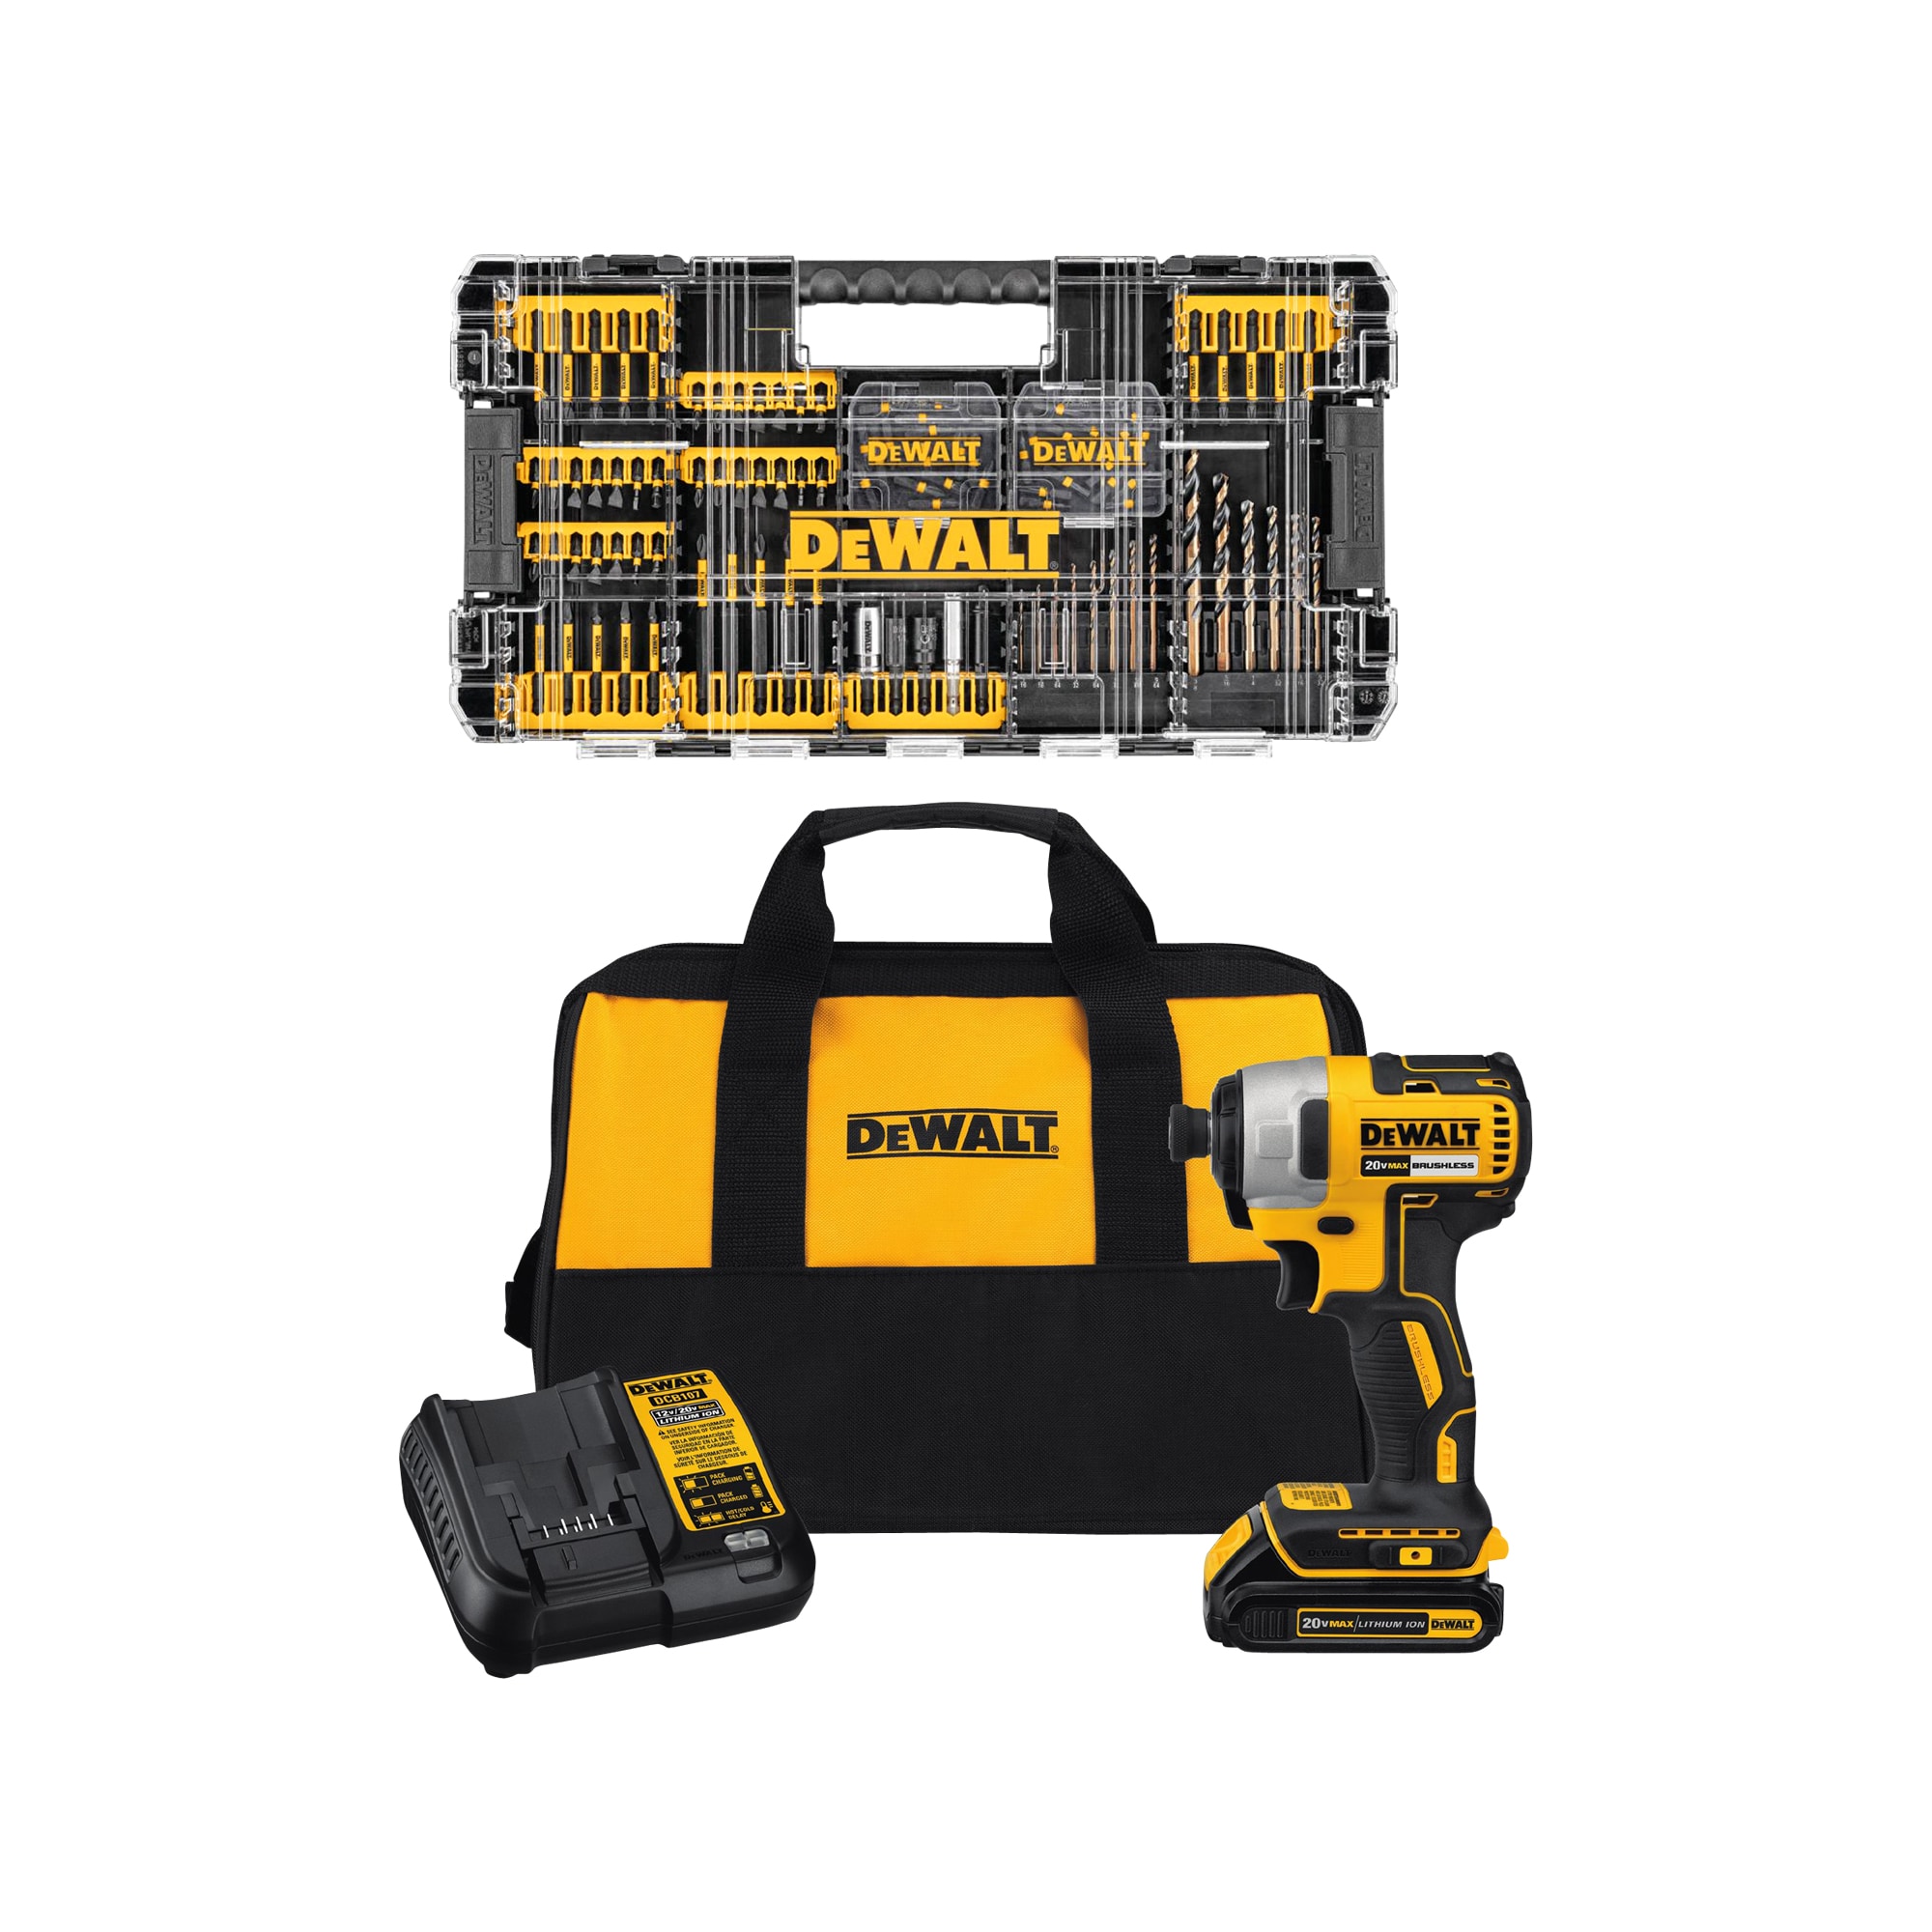 DEWALT FlexTorq 100-Piece Set Impact Driver Bit Set & 20-Volt Max 1/4-in Variable Speed Brushless Cordless Impact Driver (1-Battery Included)